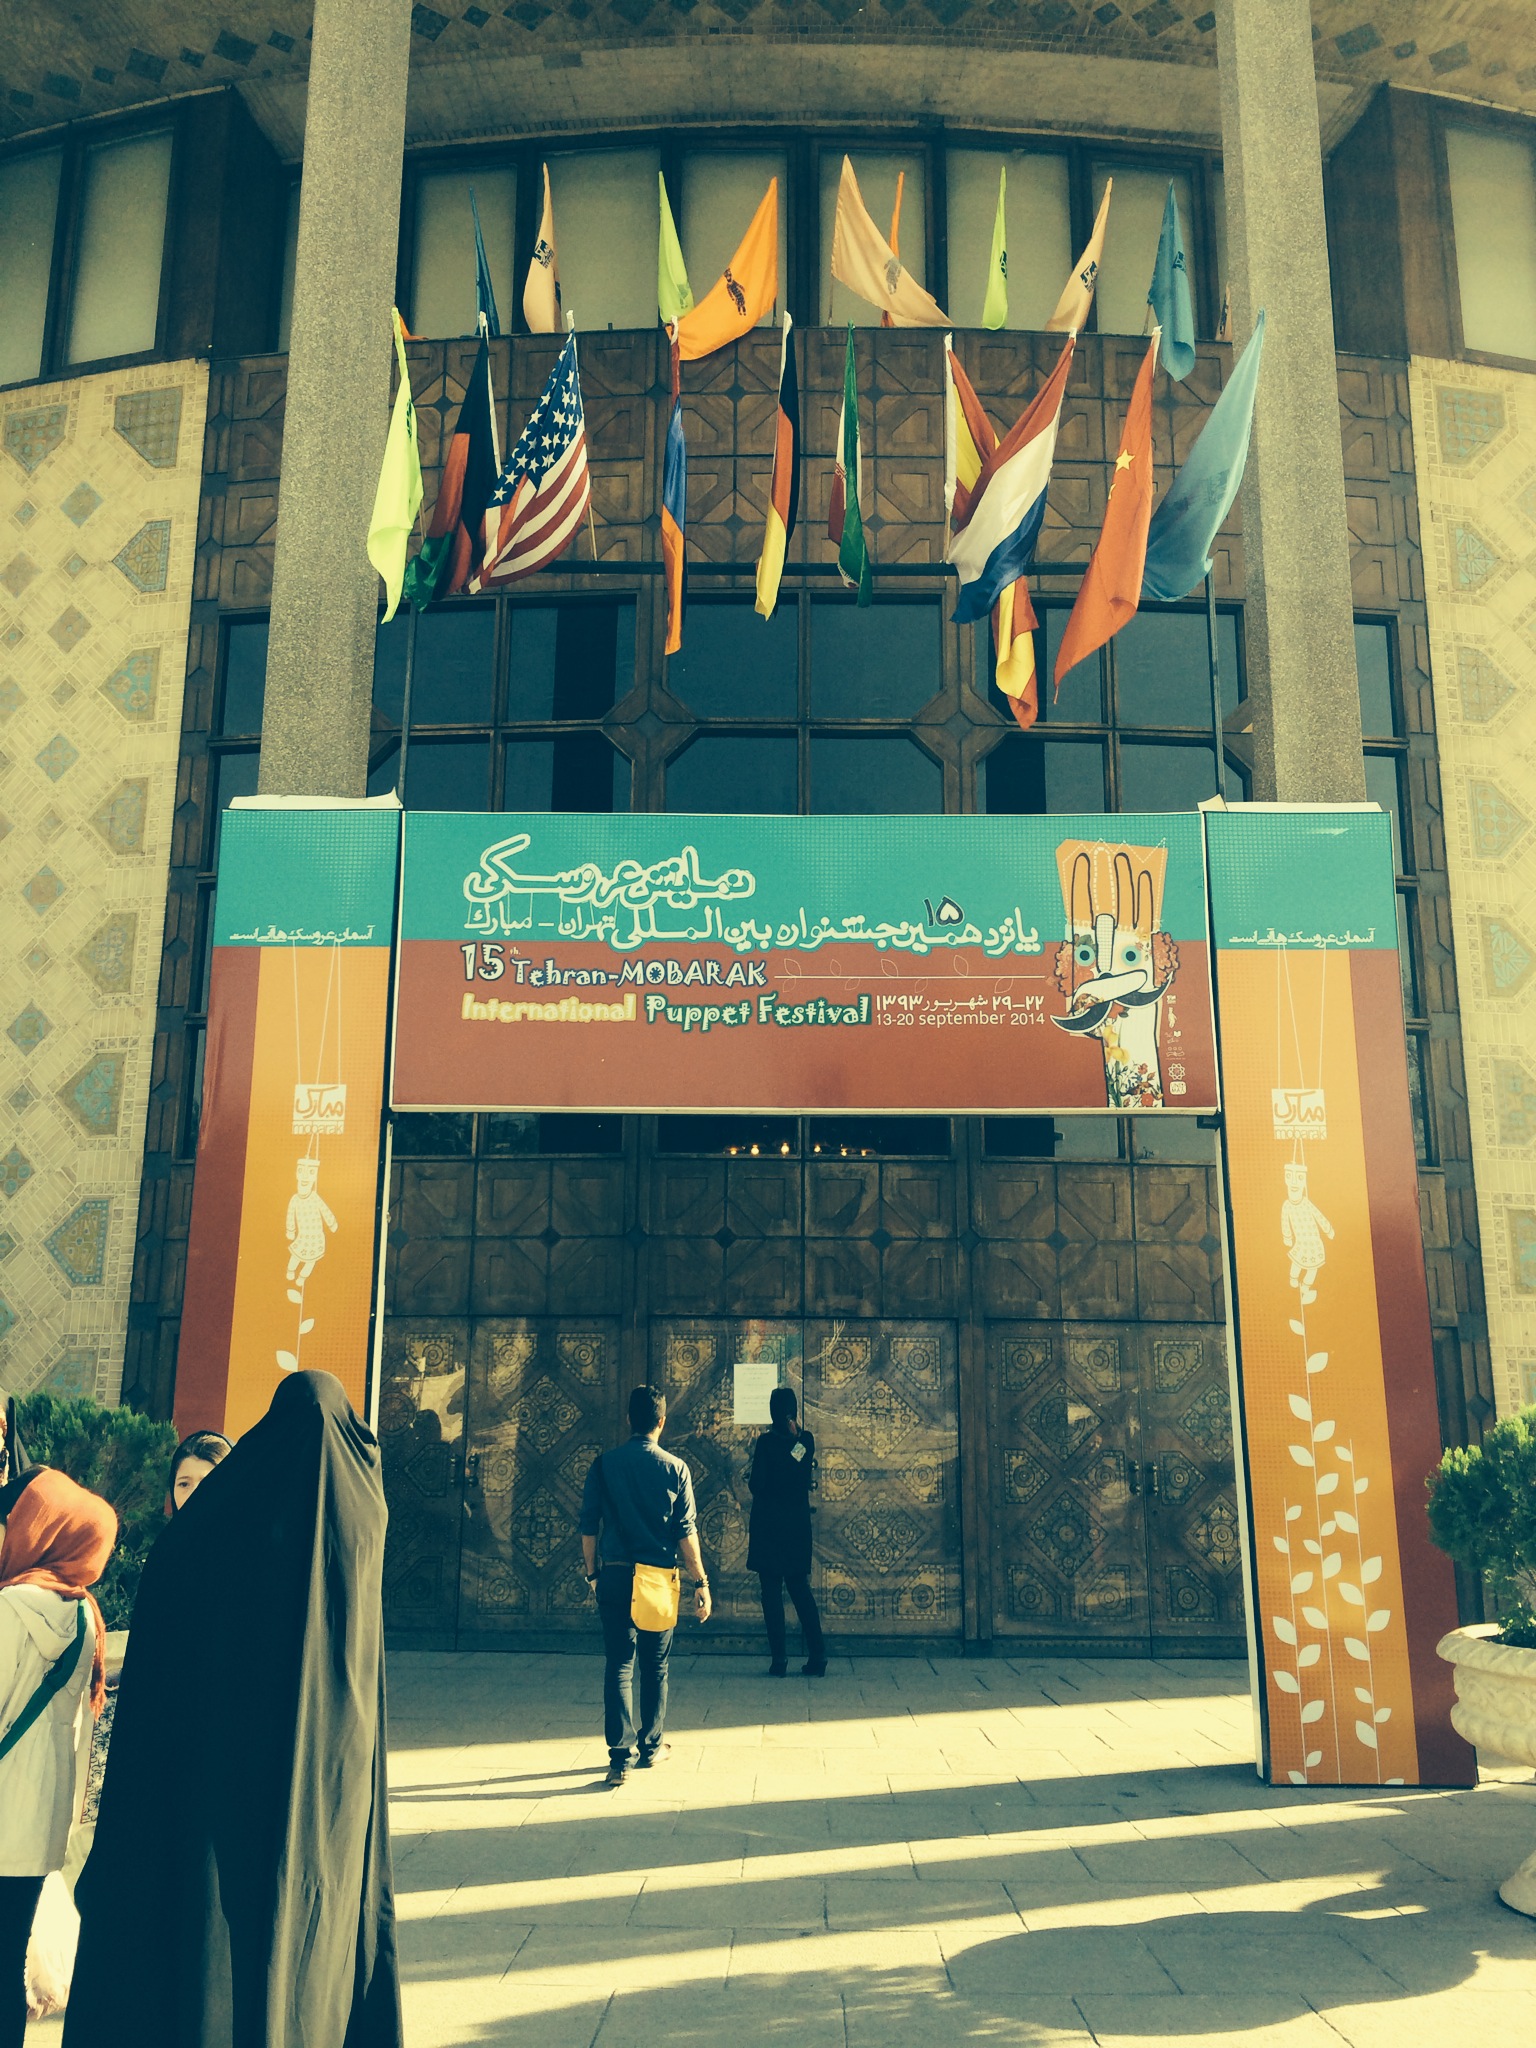 The American flag being flown outside Tehran&#039;s City Theatre during the Tehran-Mobarak International Puppet Festival.